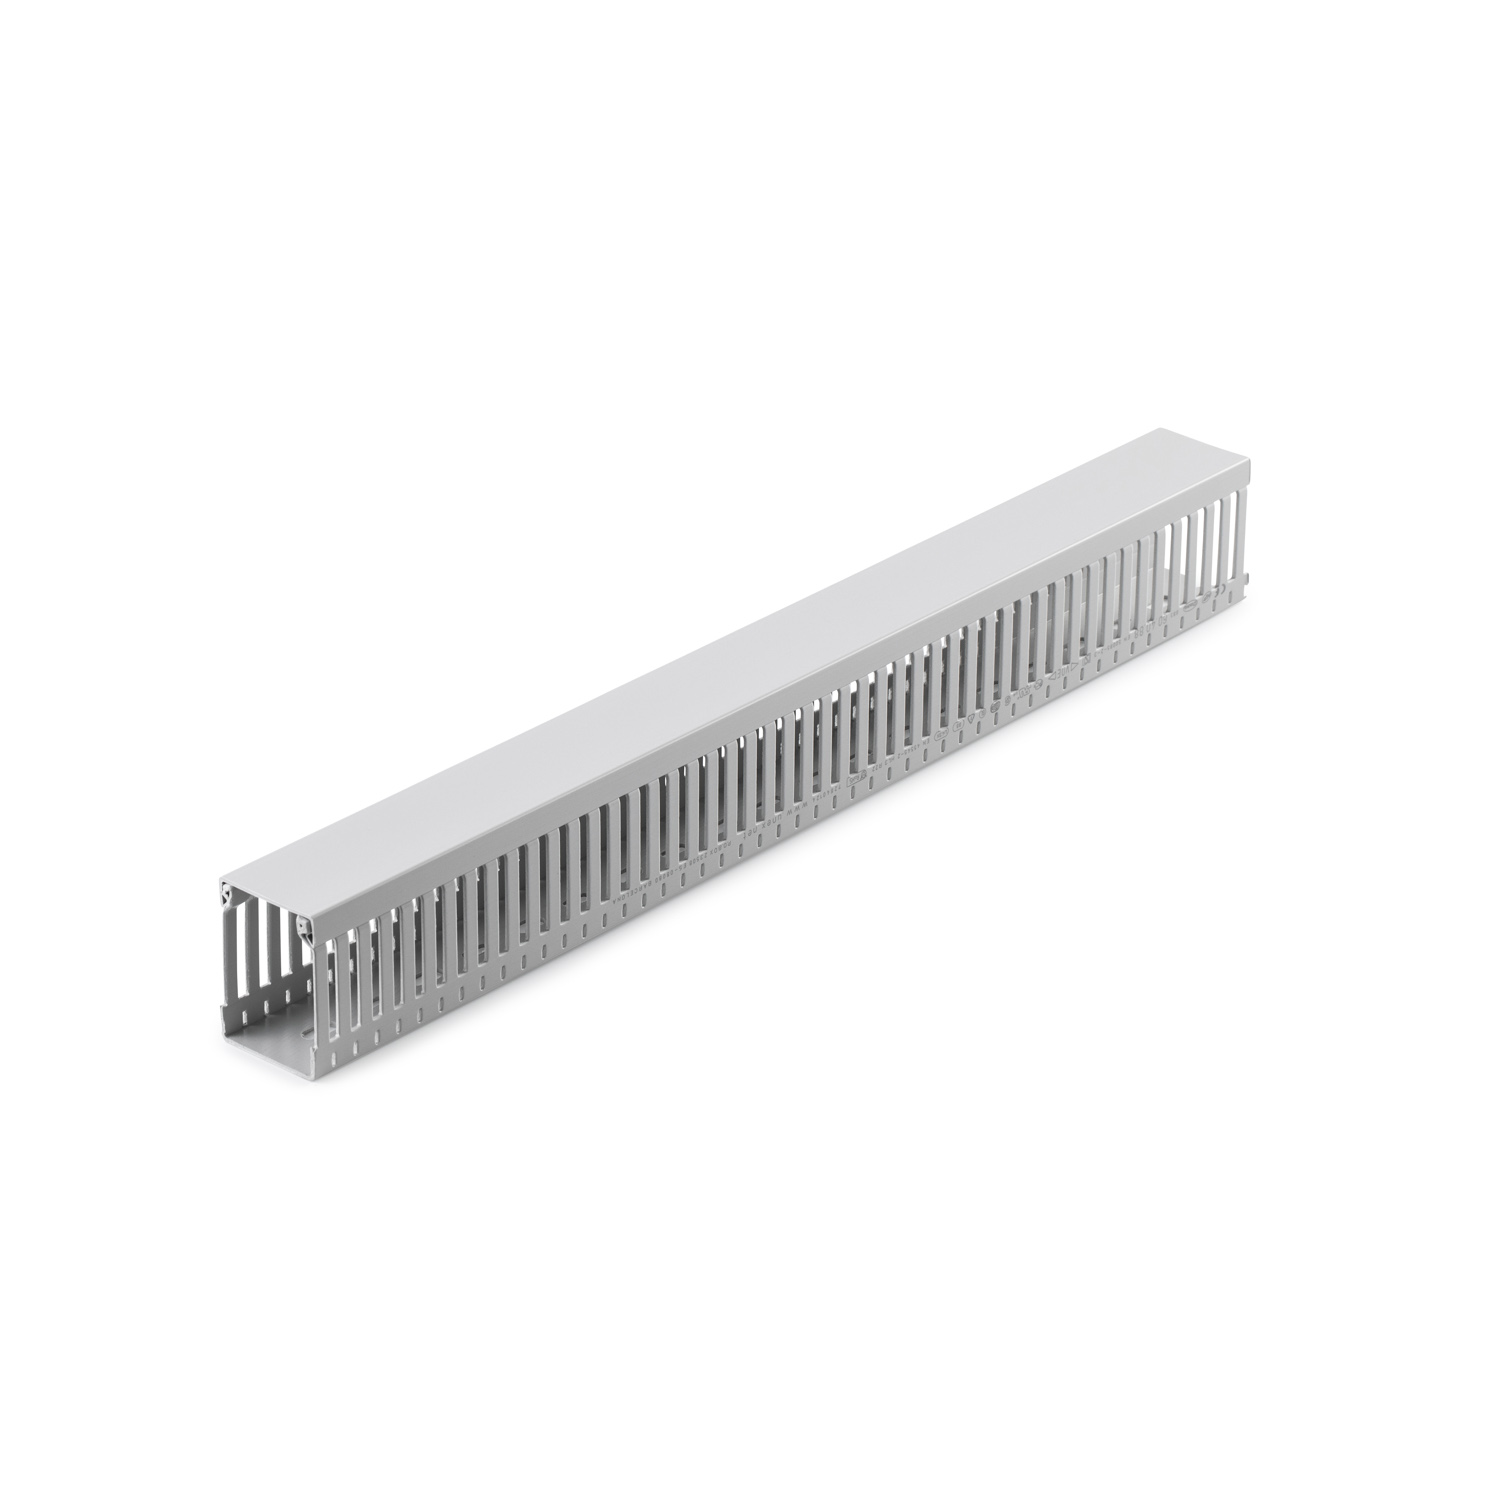 Slotted trunking 88